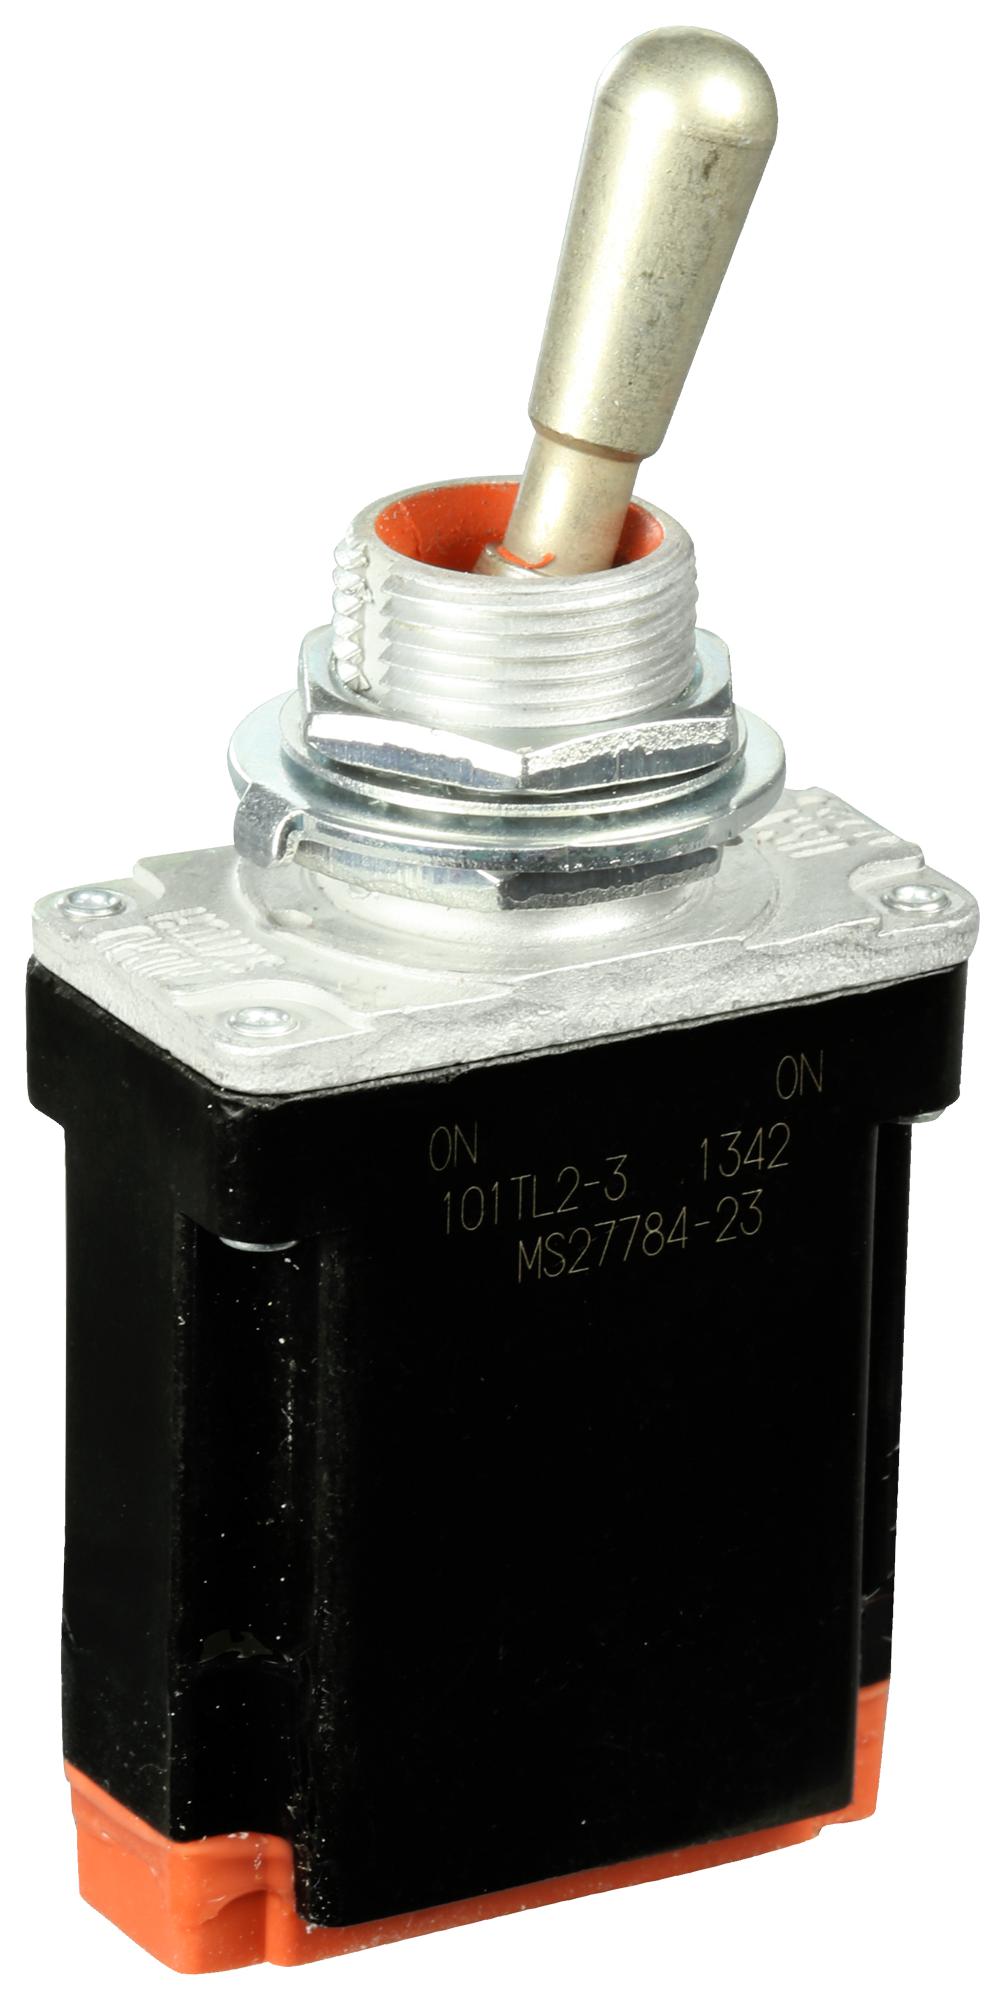 101TL2-3 TOGGLE SWITCH, SPDT, 7.5A, 250VDC, PANEL HONEYWELL